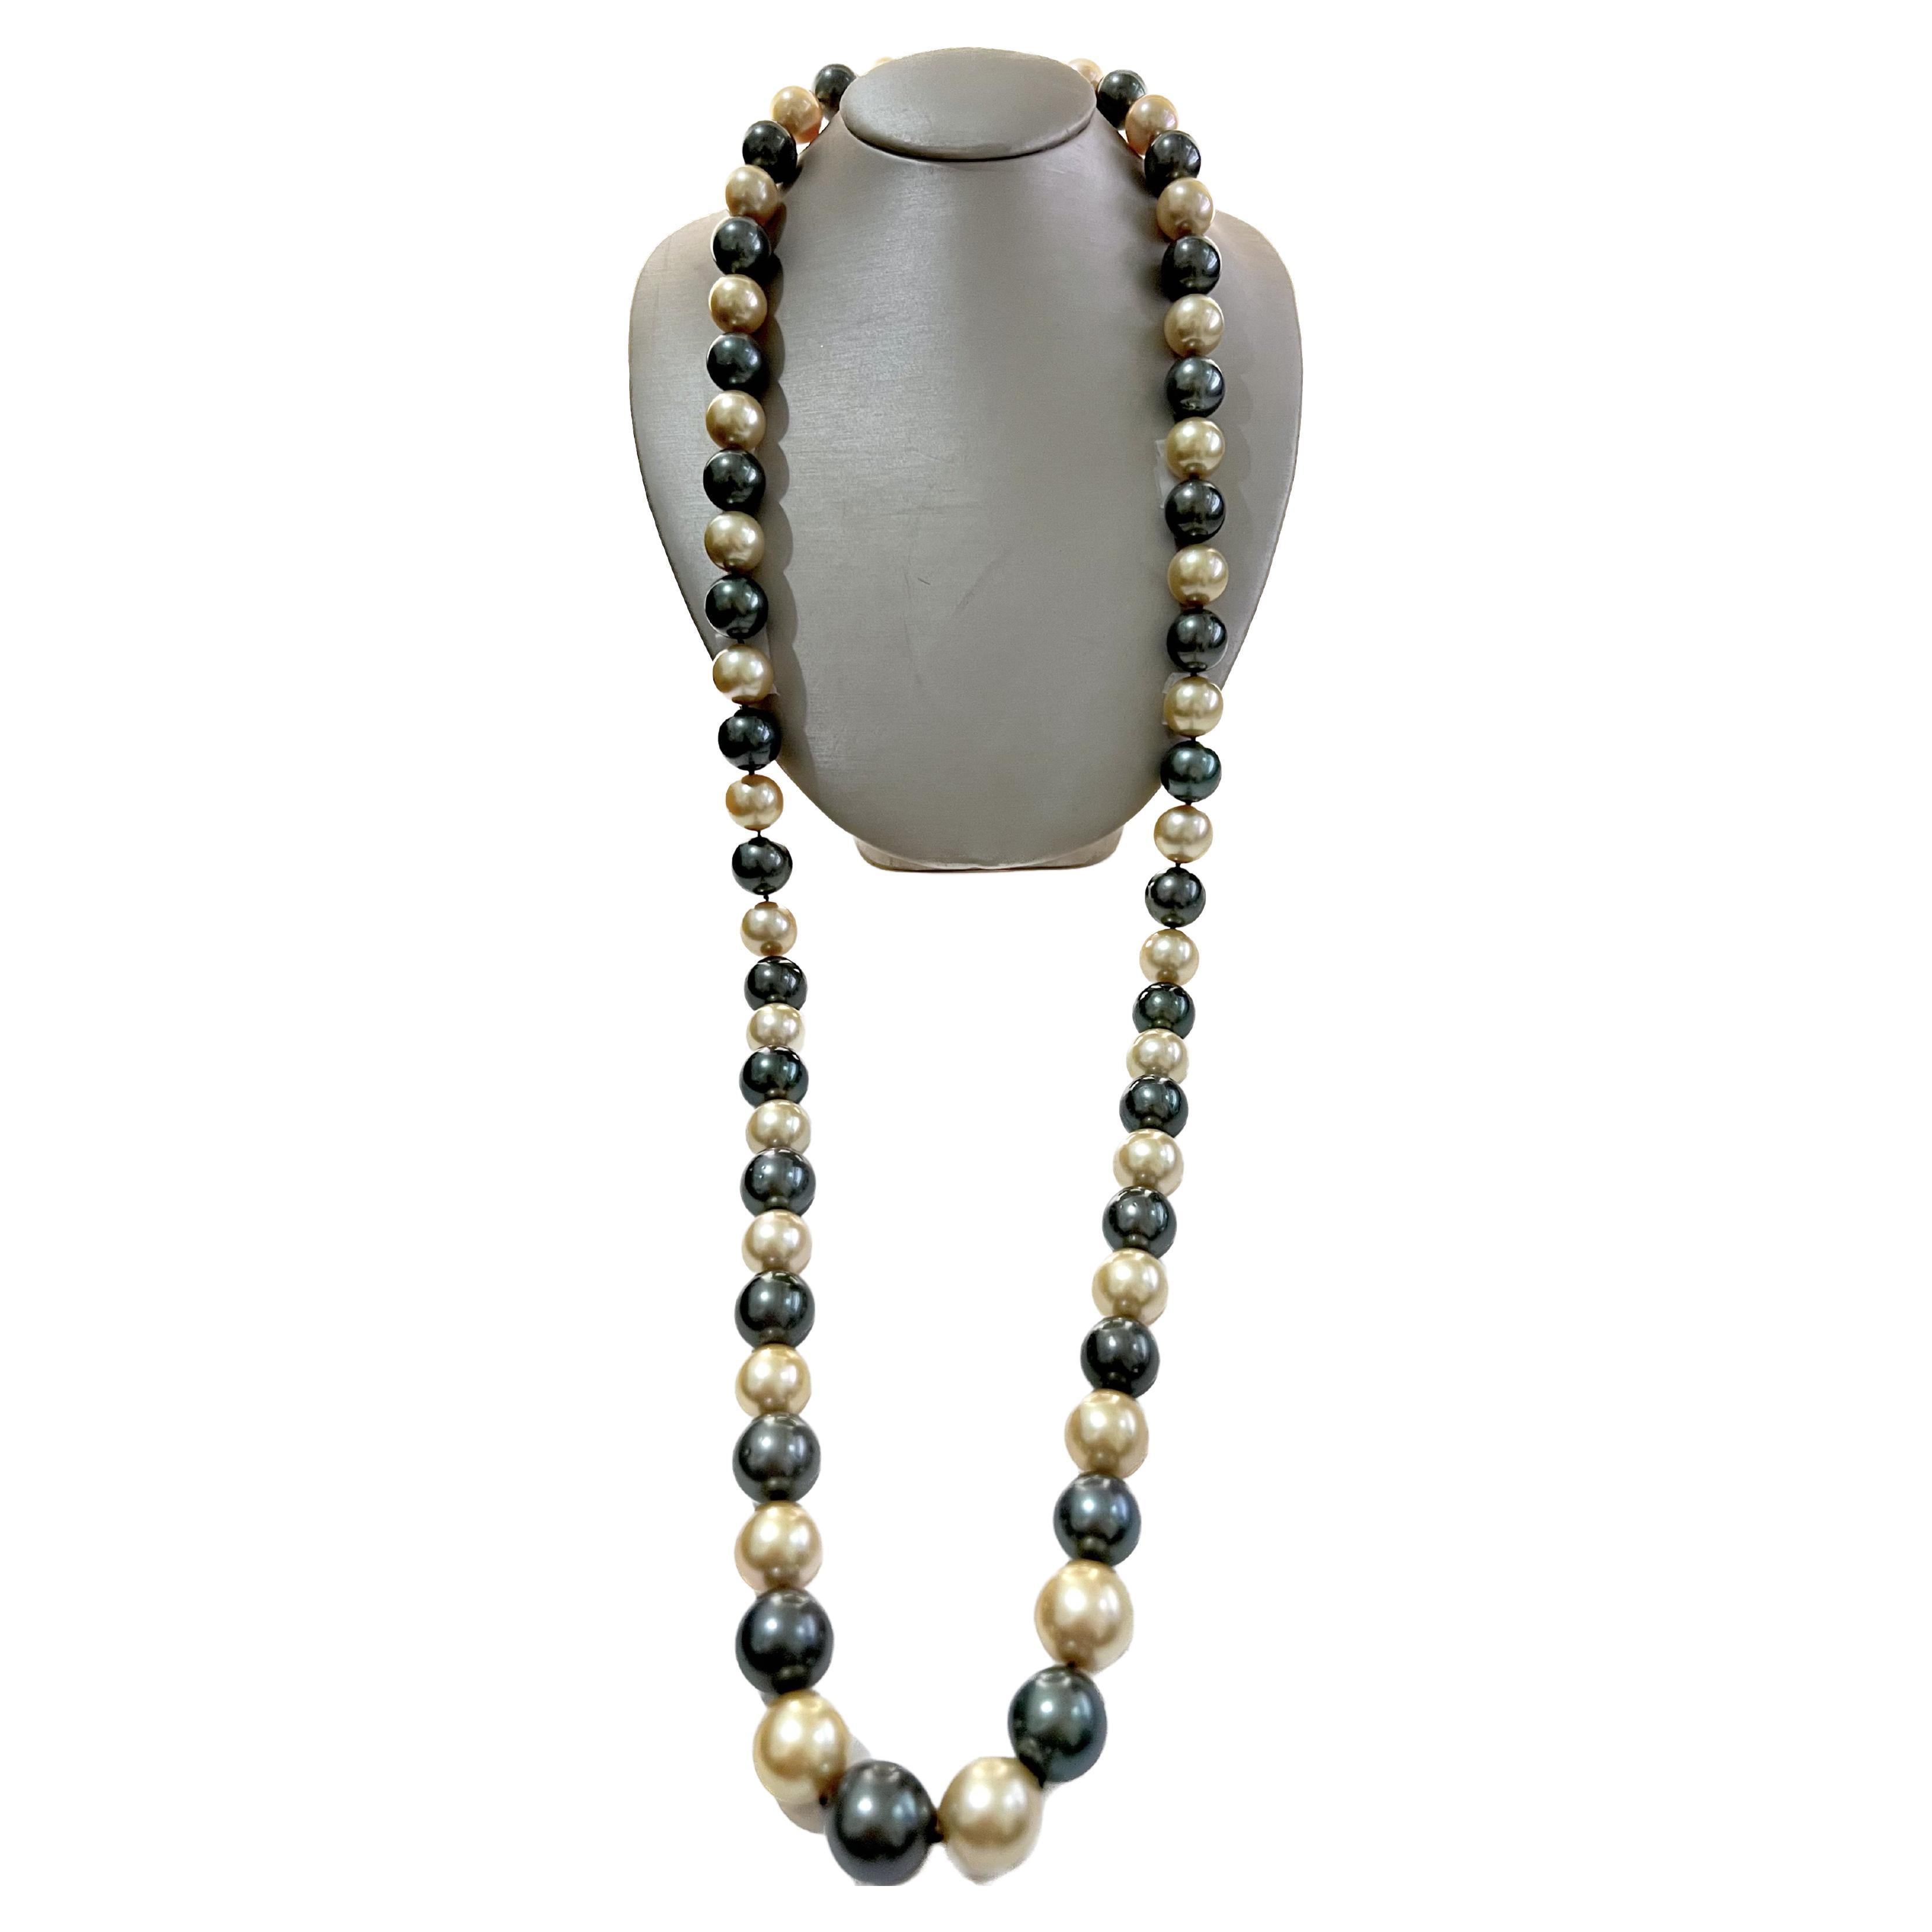 This strand of pearls is absolutely stunning.  The rich, old South Sea pearls are alternating with the black Tahitian pearls to give a royal, elegant look.  The pearls range from 12 mm - 15.70 mm in size and is approximately 34.5 inches in length. 